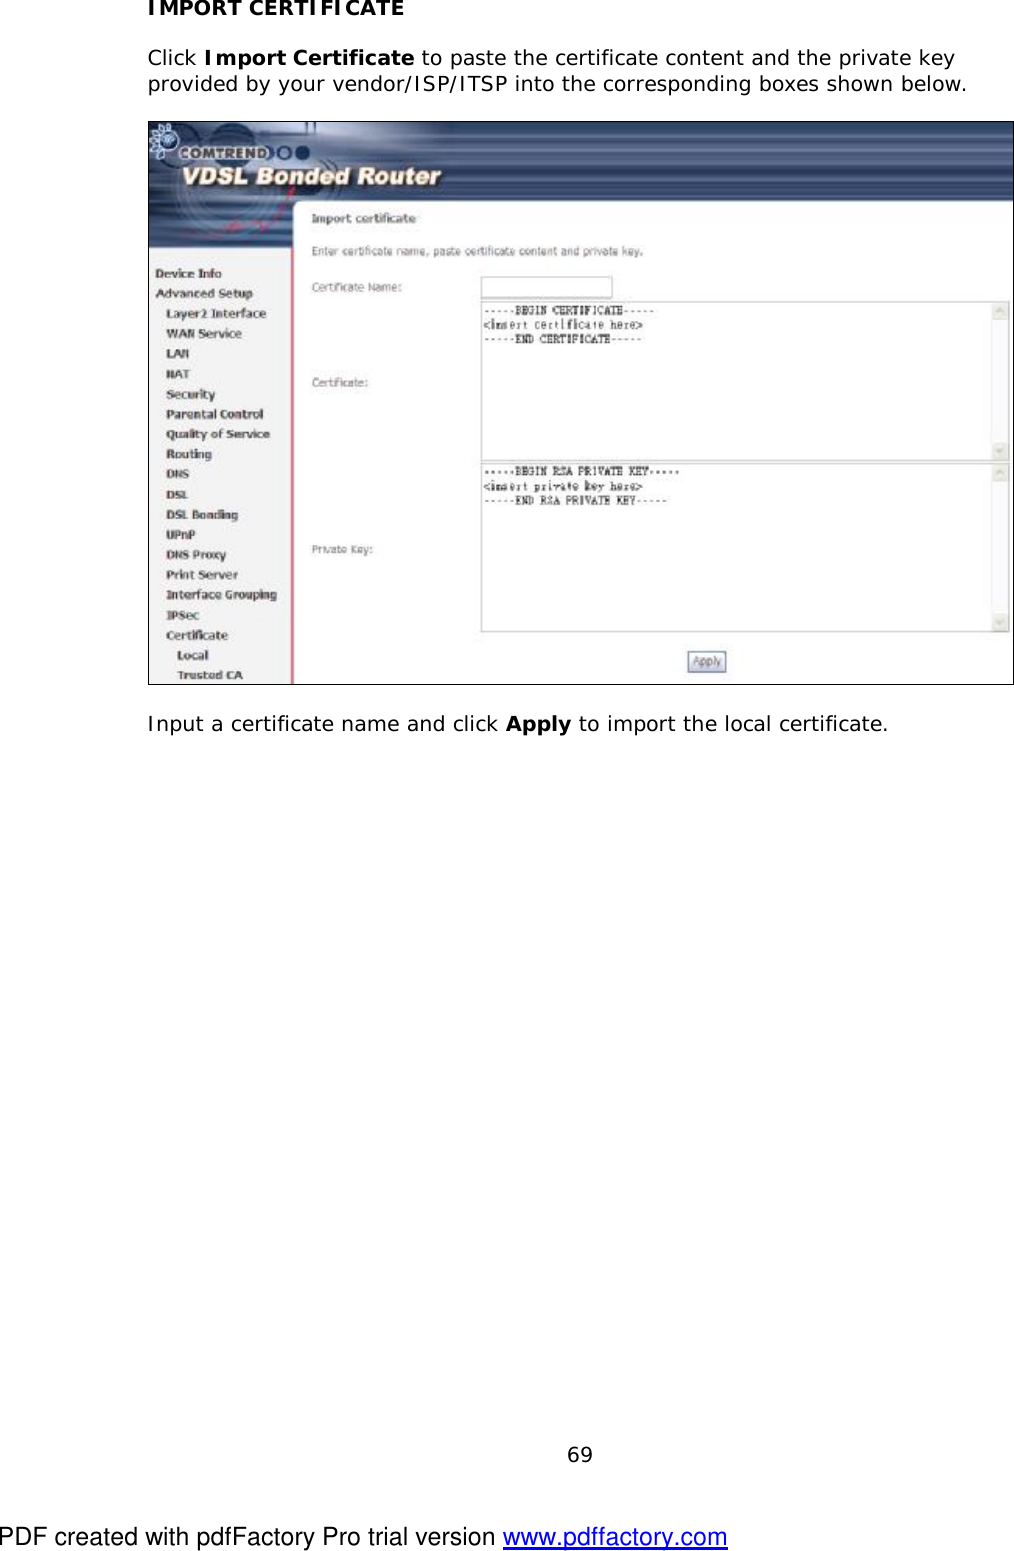  69 IMPORT CERTIFICATE  Click Import Certificate to paste the certificate content and the private key provided by your vendor/ISP/ITSP into the corresponding boxes shown below.    Input a certificate name and click Apply to import the local certificate. PDF created with pdfFactory Pro trial version www.pdffactory.com